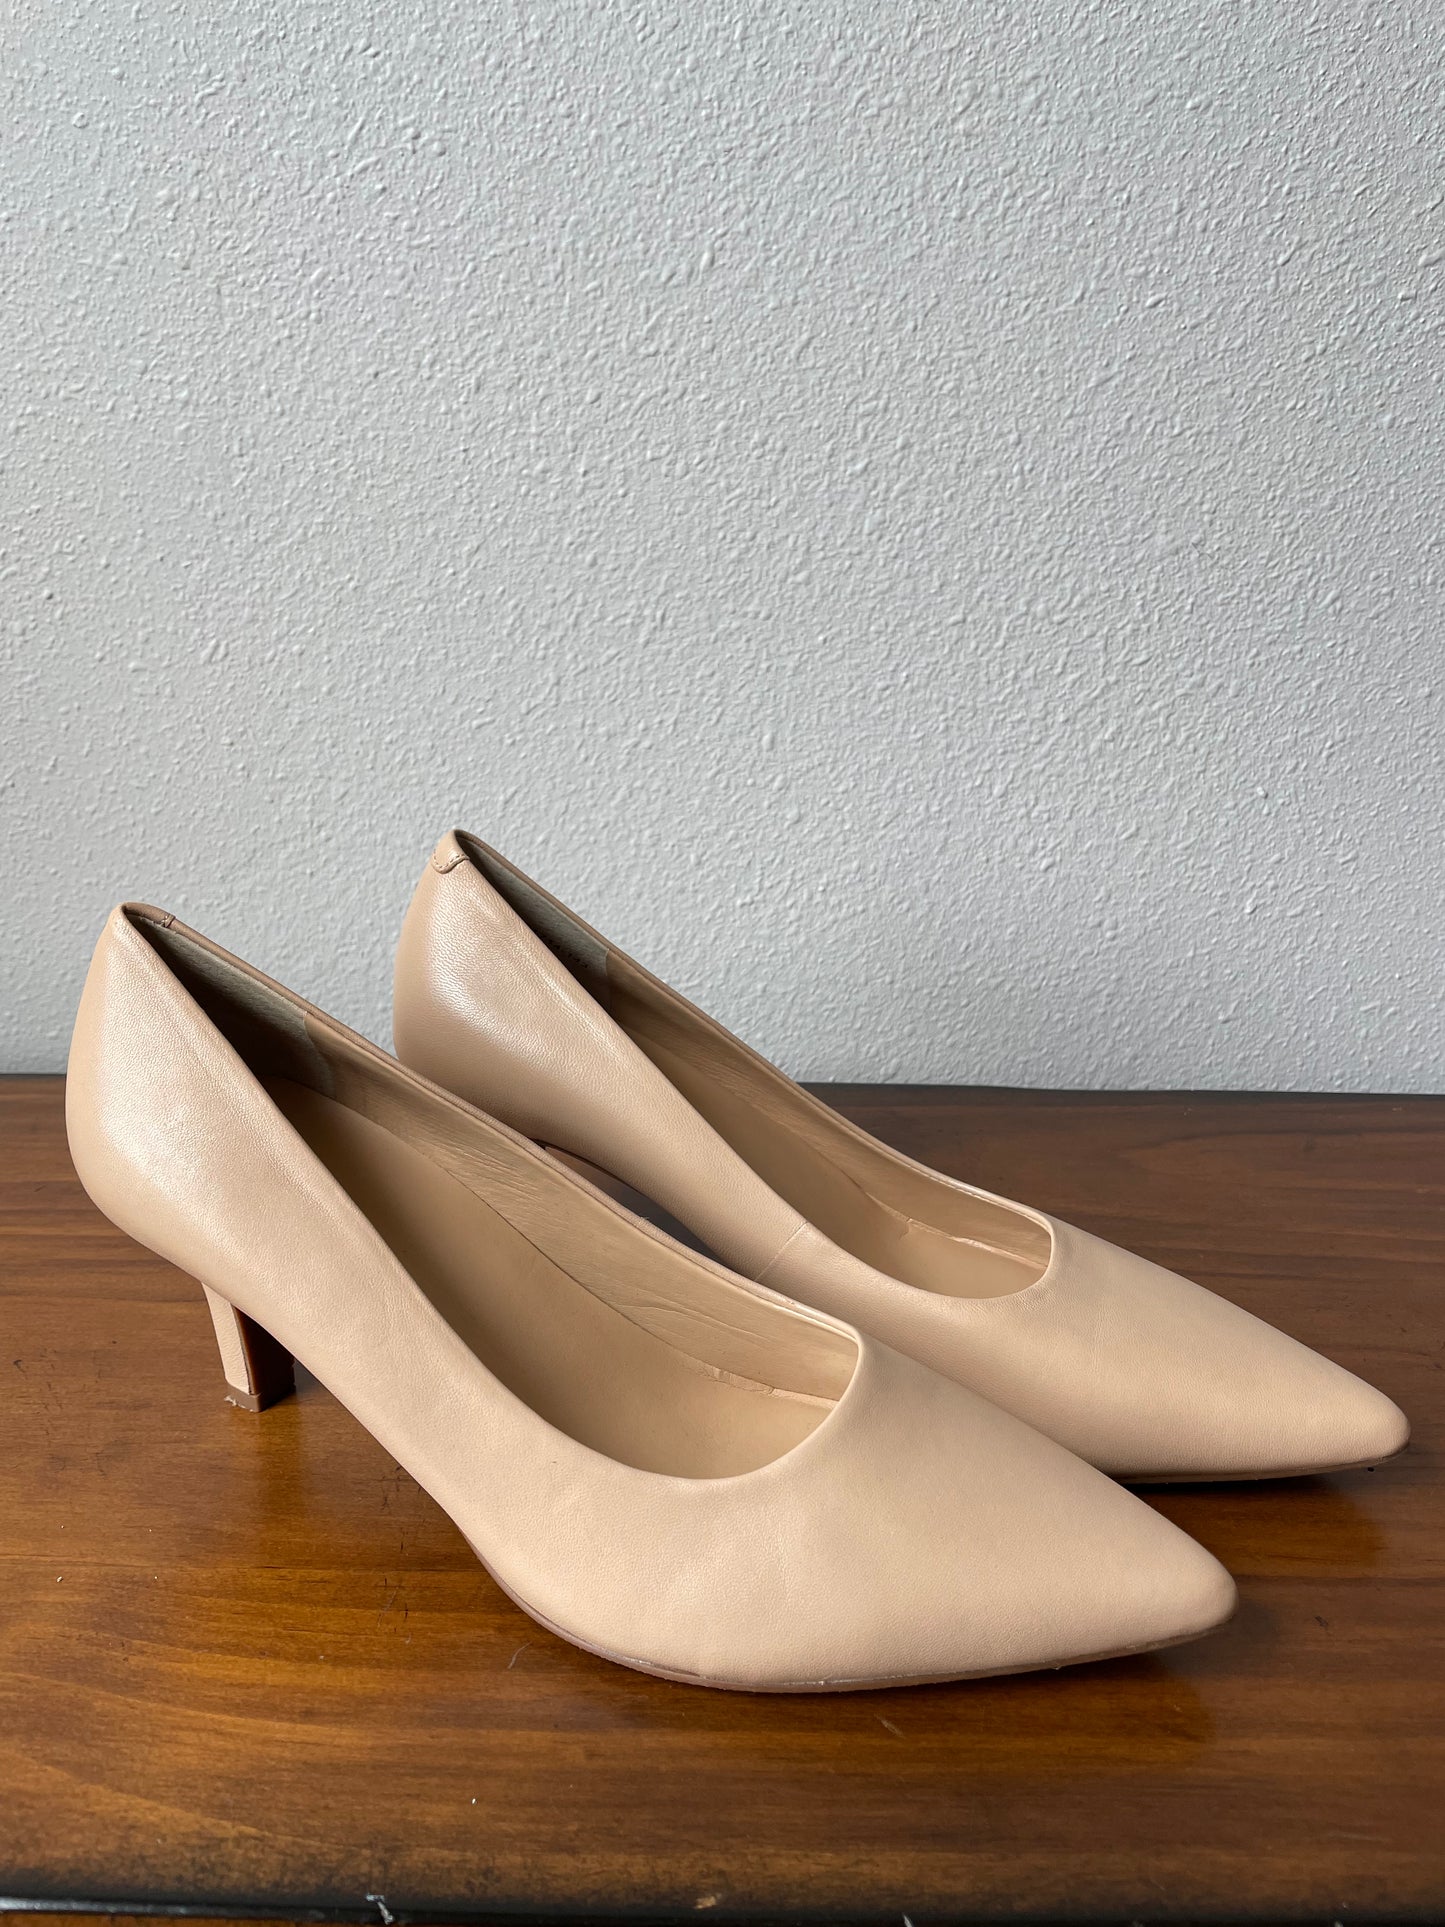 Trotters Nude Pointed Heels (7.5M)